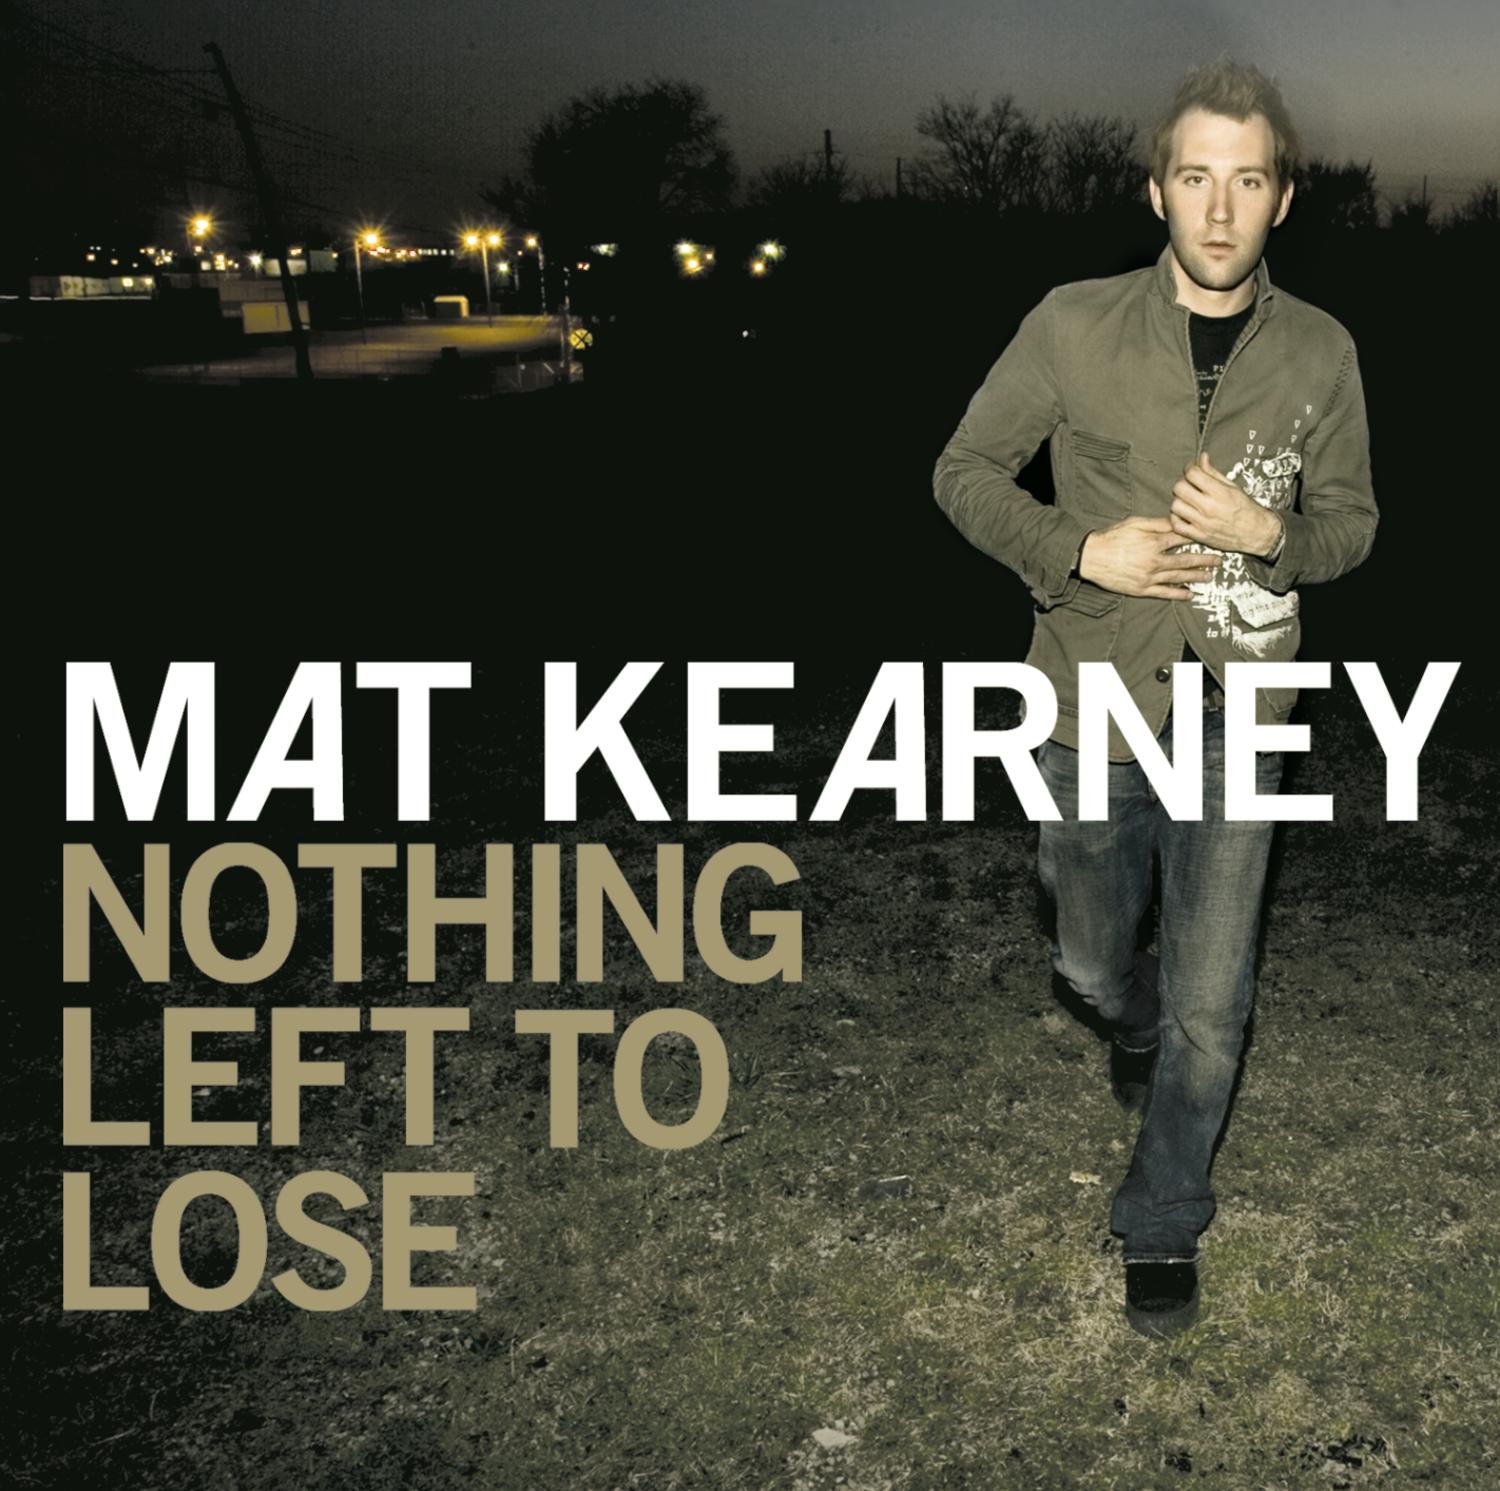 Mat Kearney "Nothing Left to Lose"